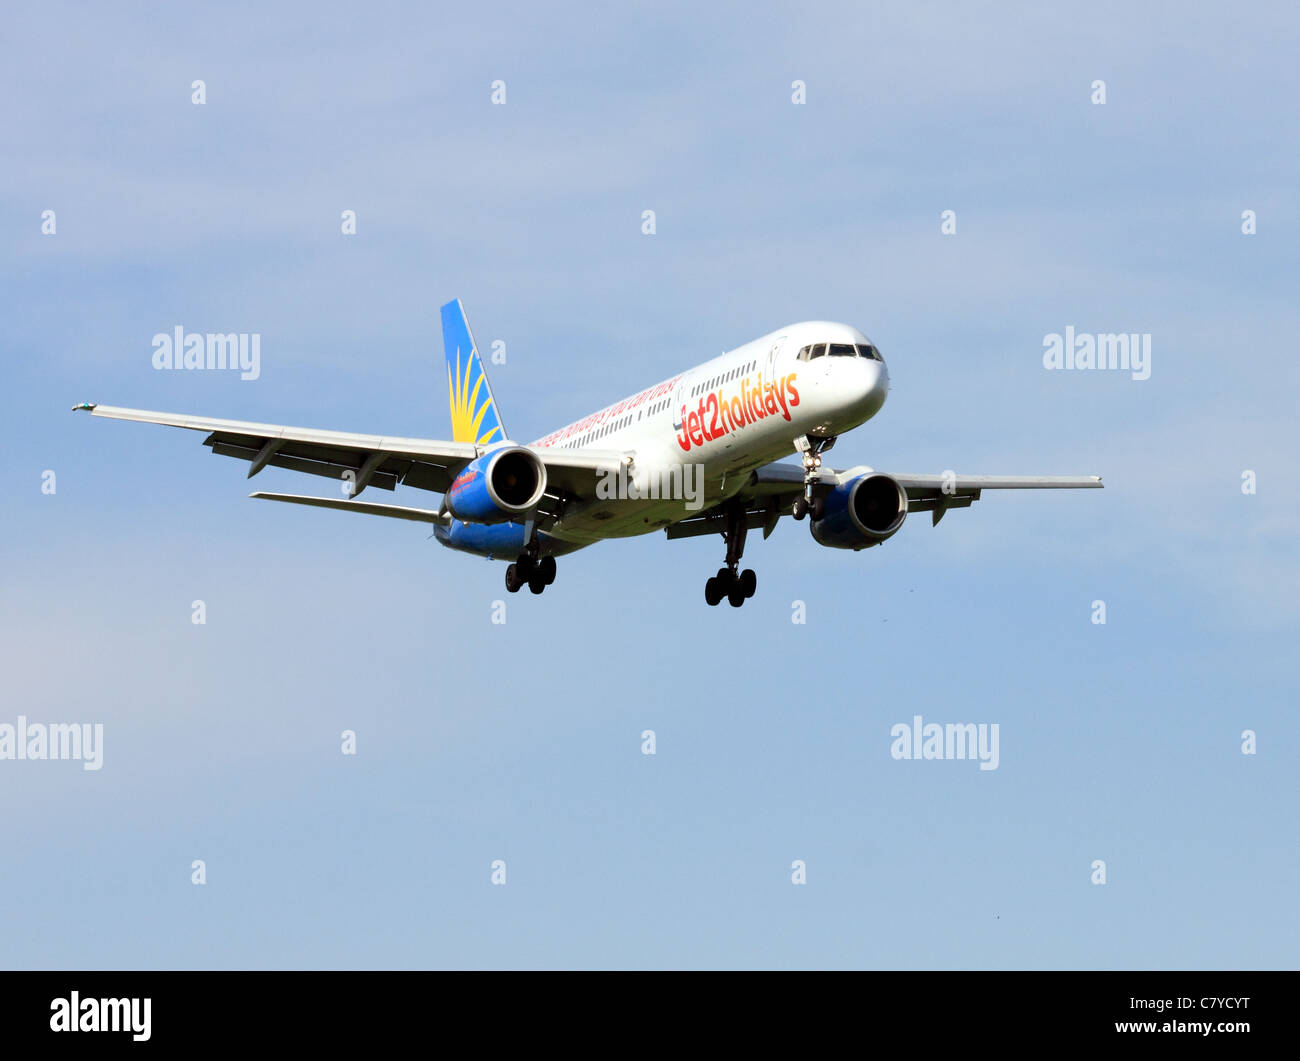 Boeing 737 Jet on a Holiday Flight Stock Photo